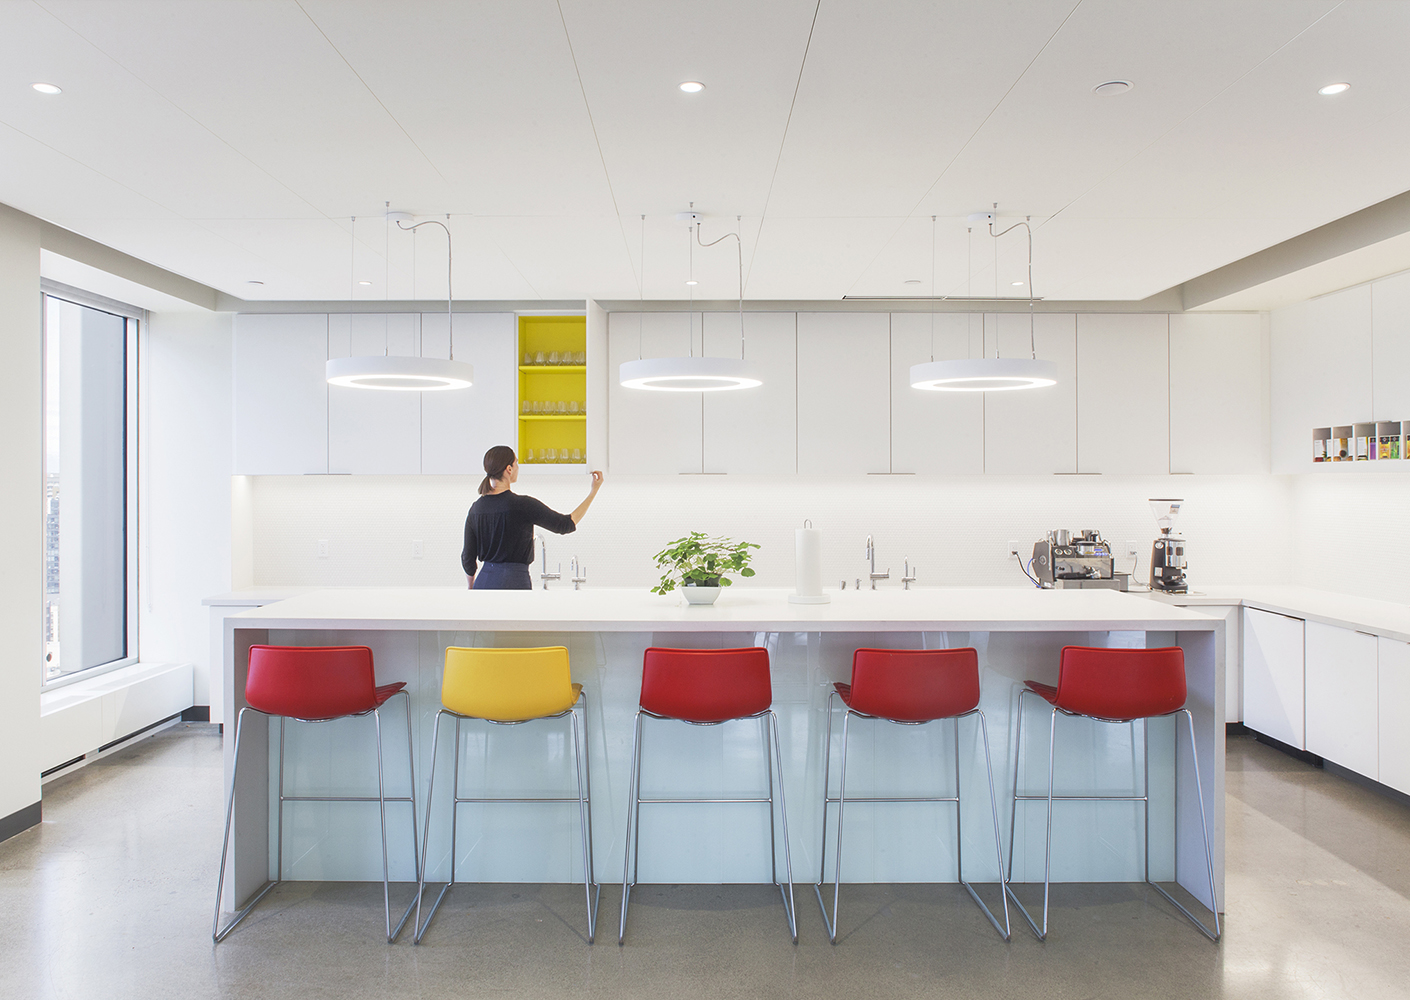 Clean white kitchen with red and yellow bar chairs and woman opening cabinet to show pop of yellow inside